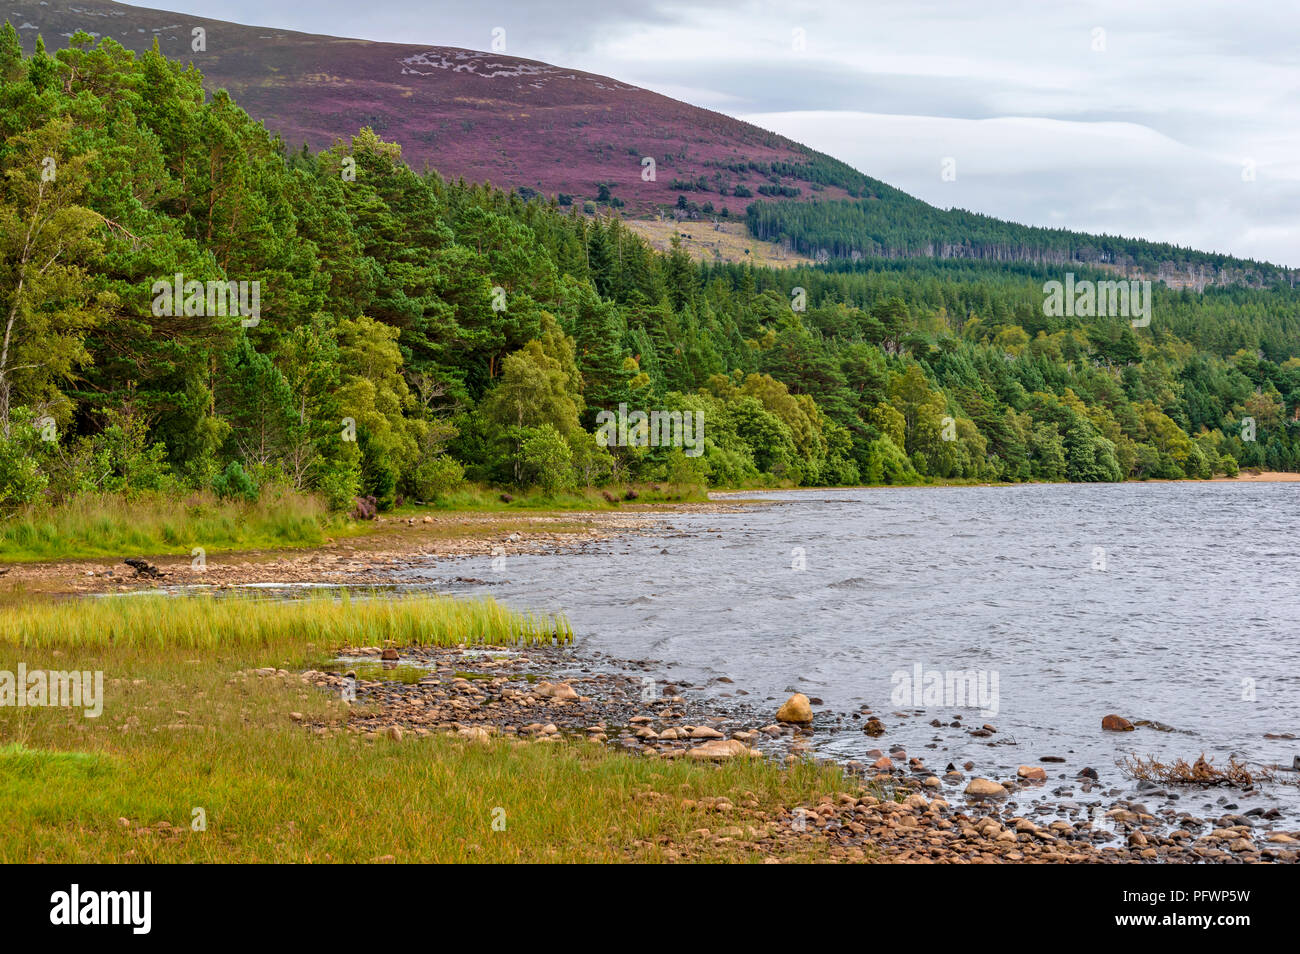 LOCH MORLICH NEAR AVIEMORE SCOTLAND THE SHORELINE WITH TREES AND REEDS PURPLE HEATHER ON THE HILL Stock Photo